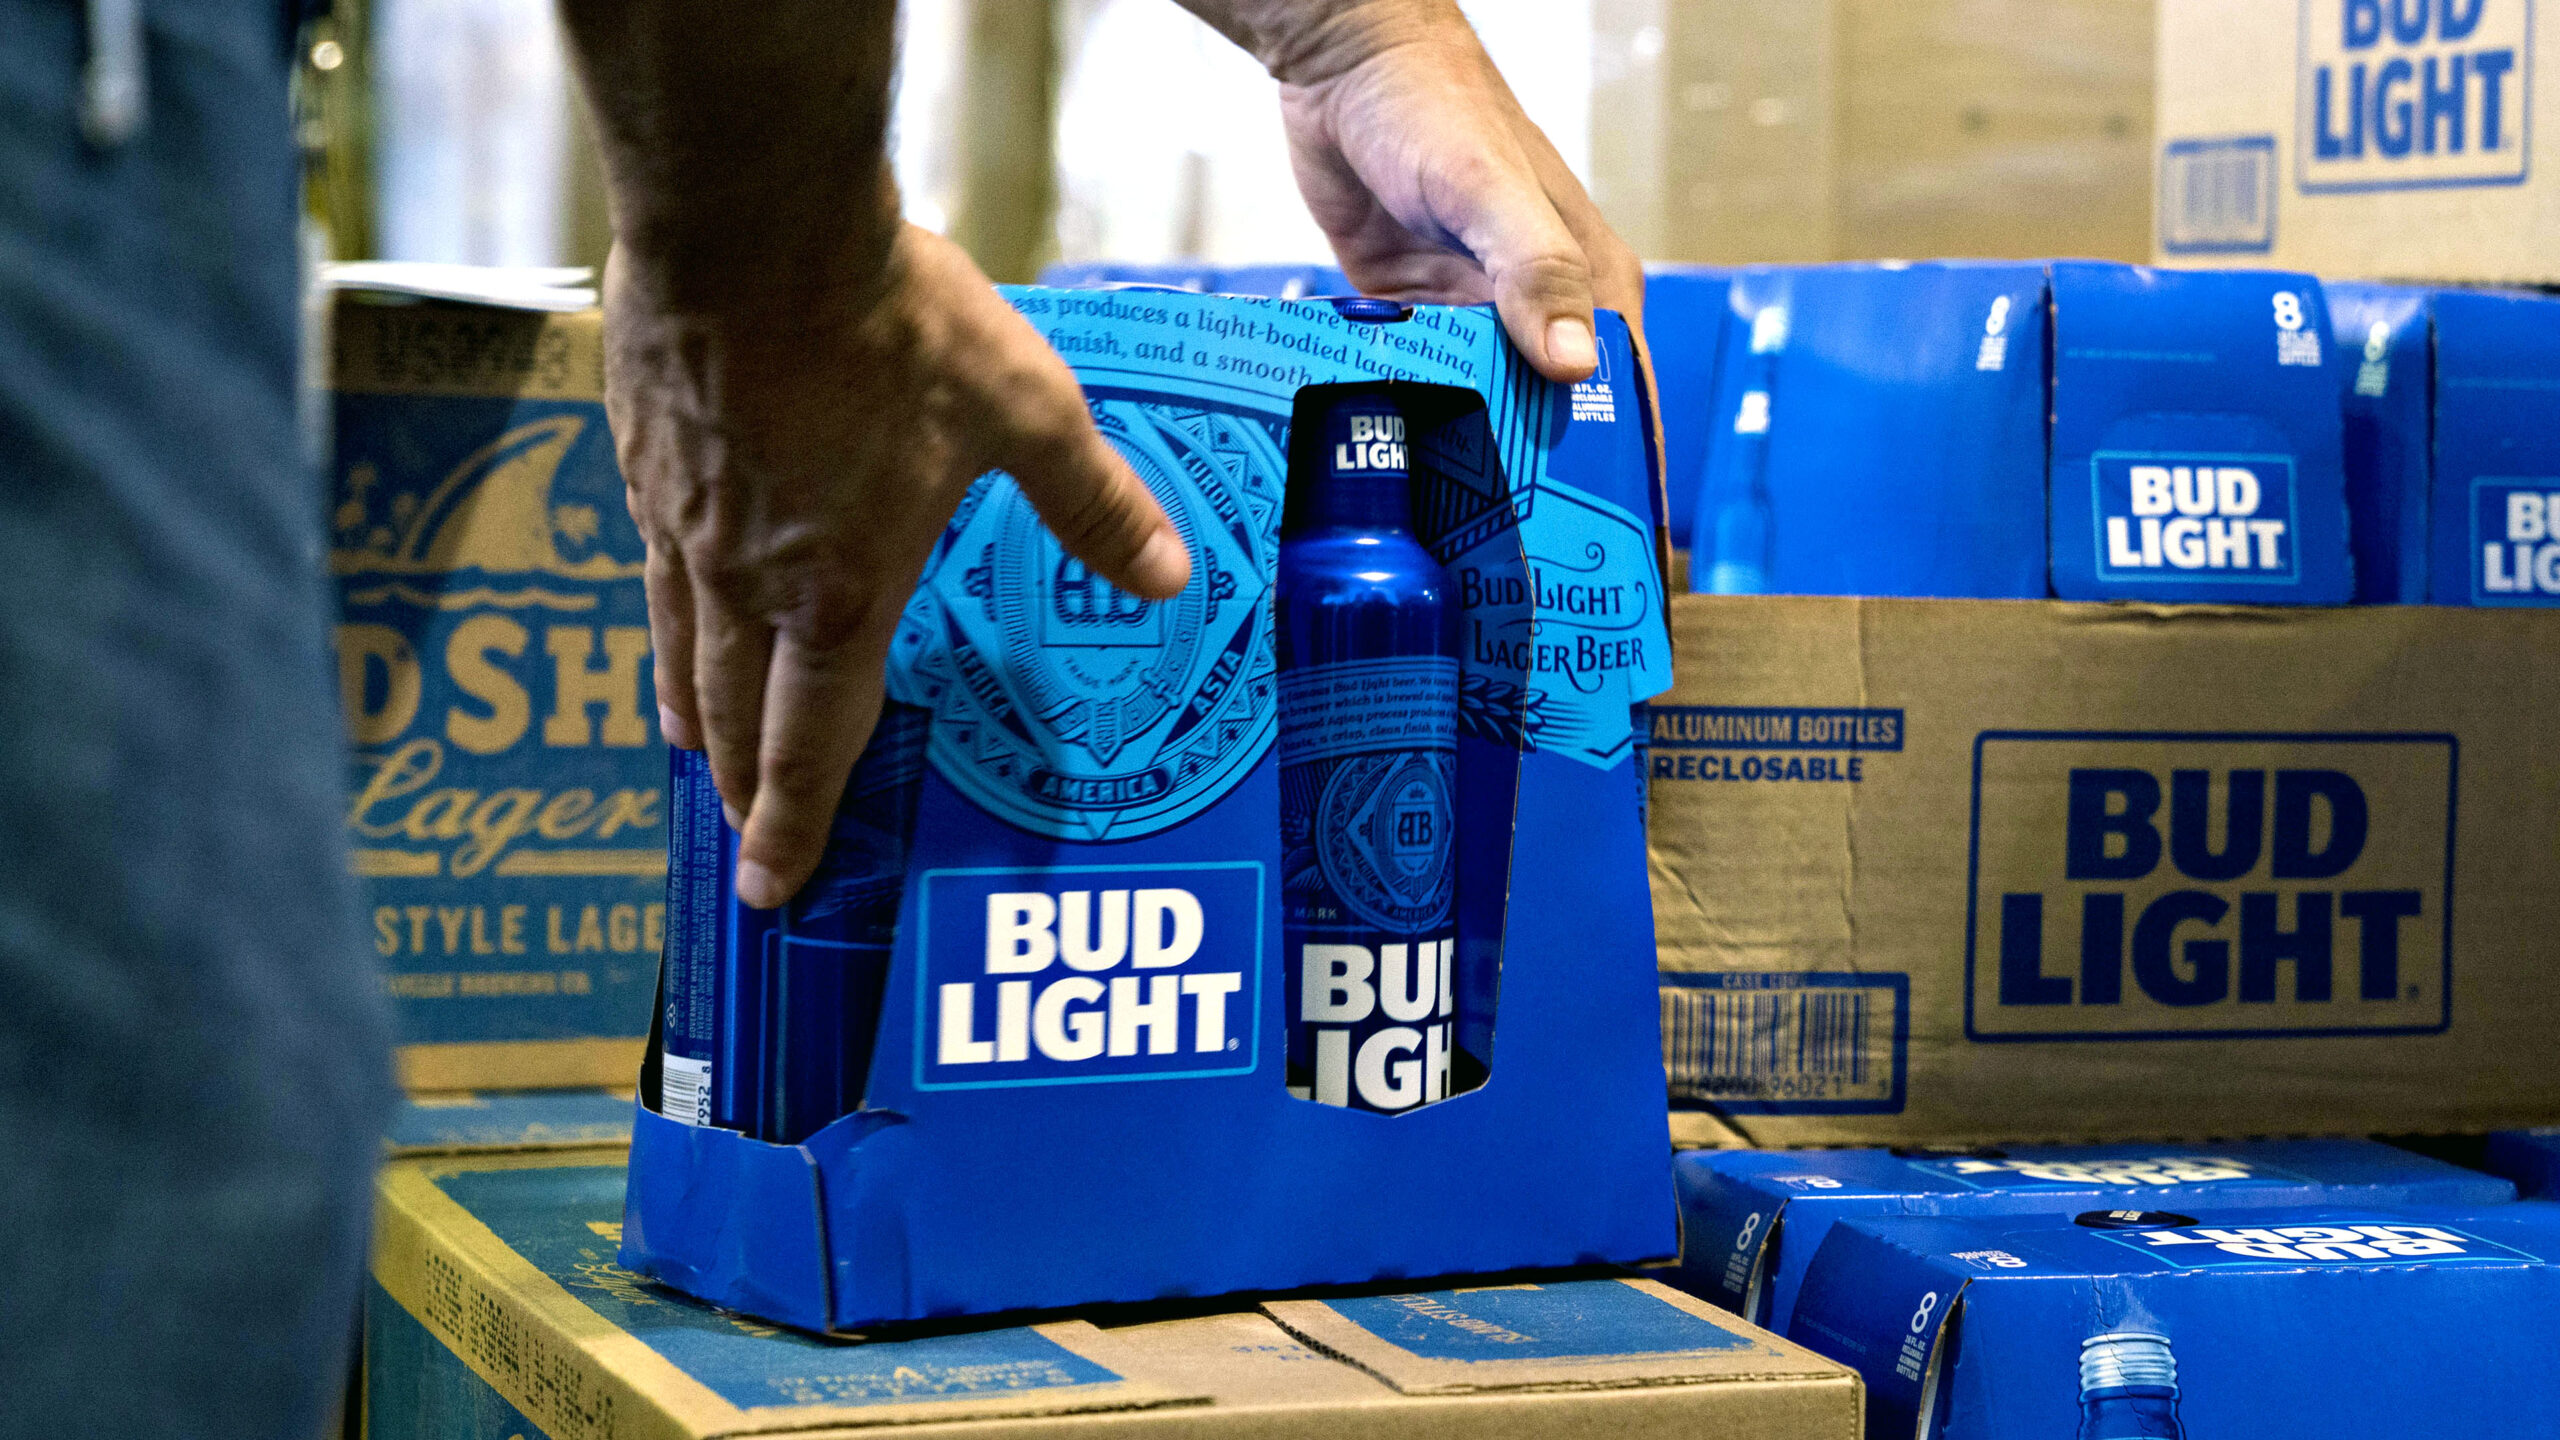 Anheuser-Busch CEO Breaks Long Silence Amid Dylan Mulvaney PR Crisis